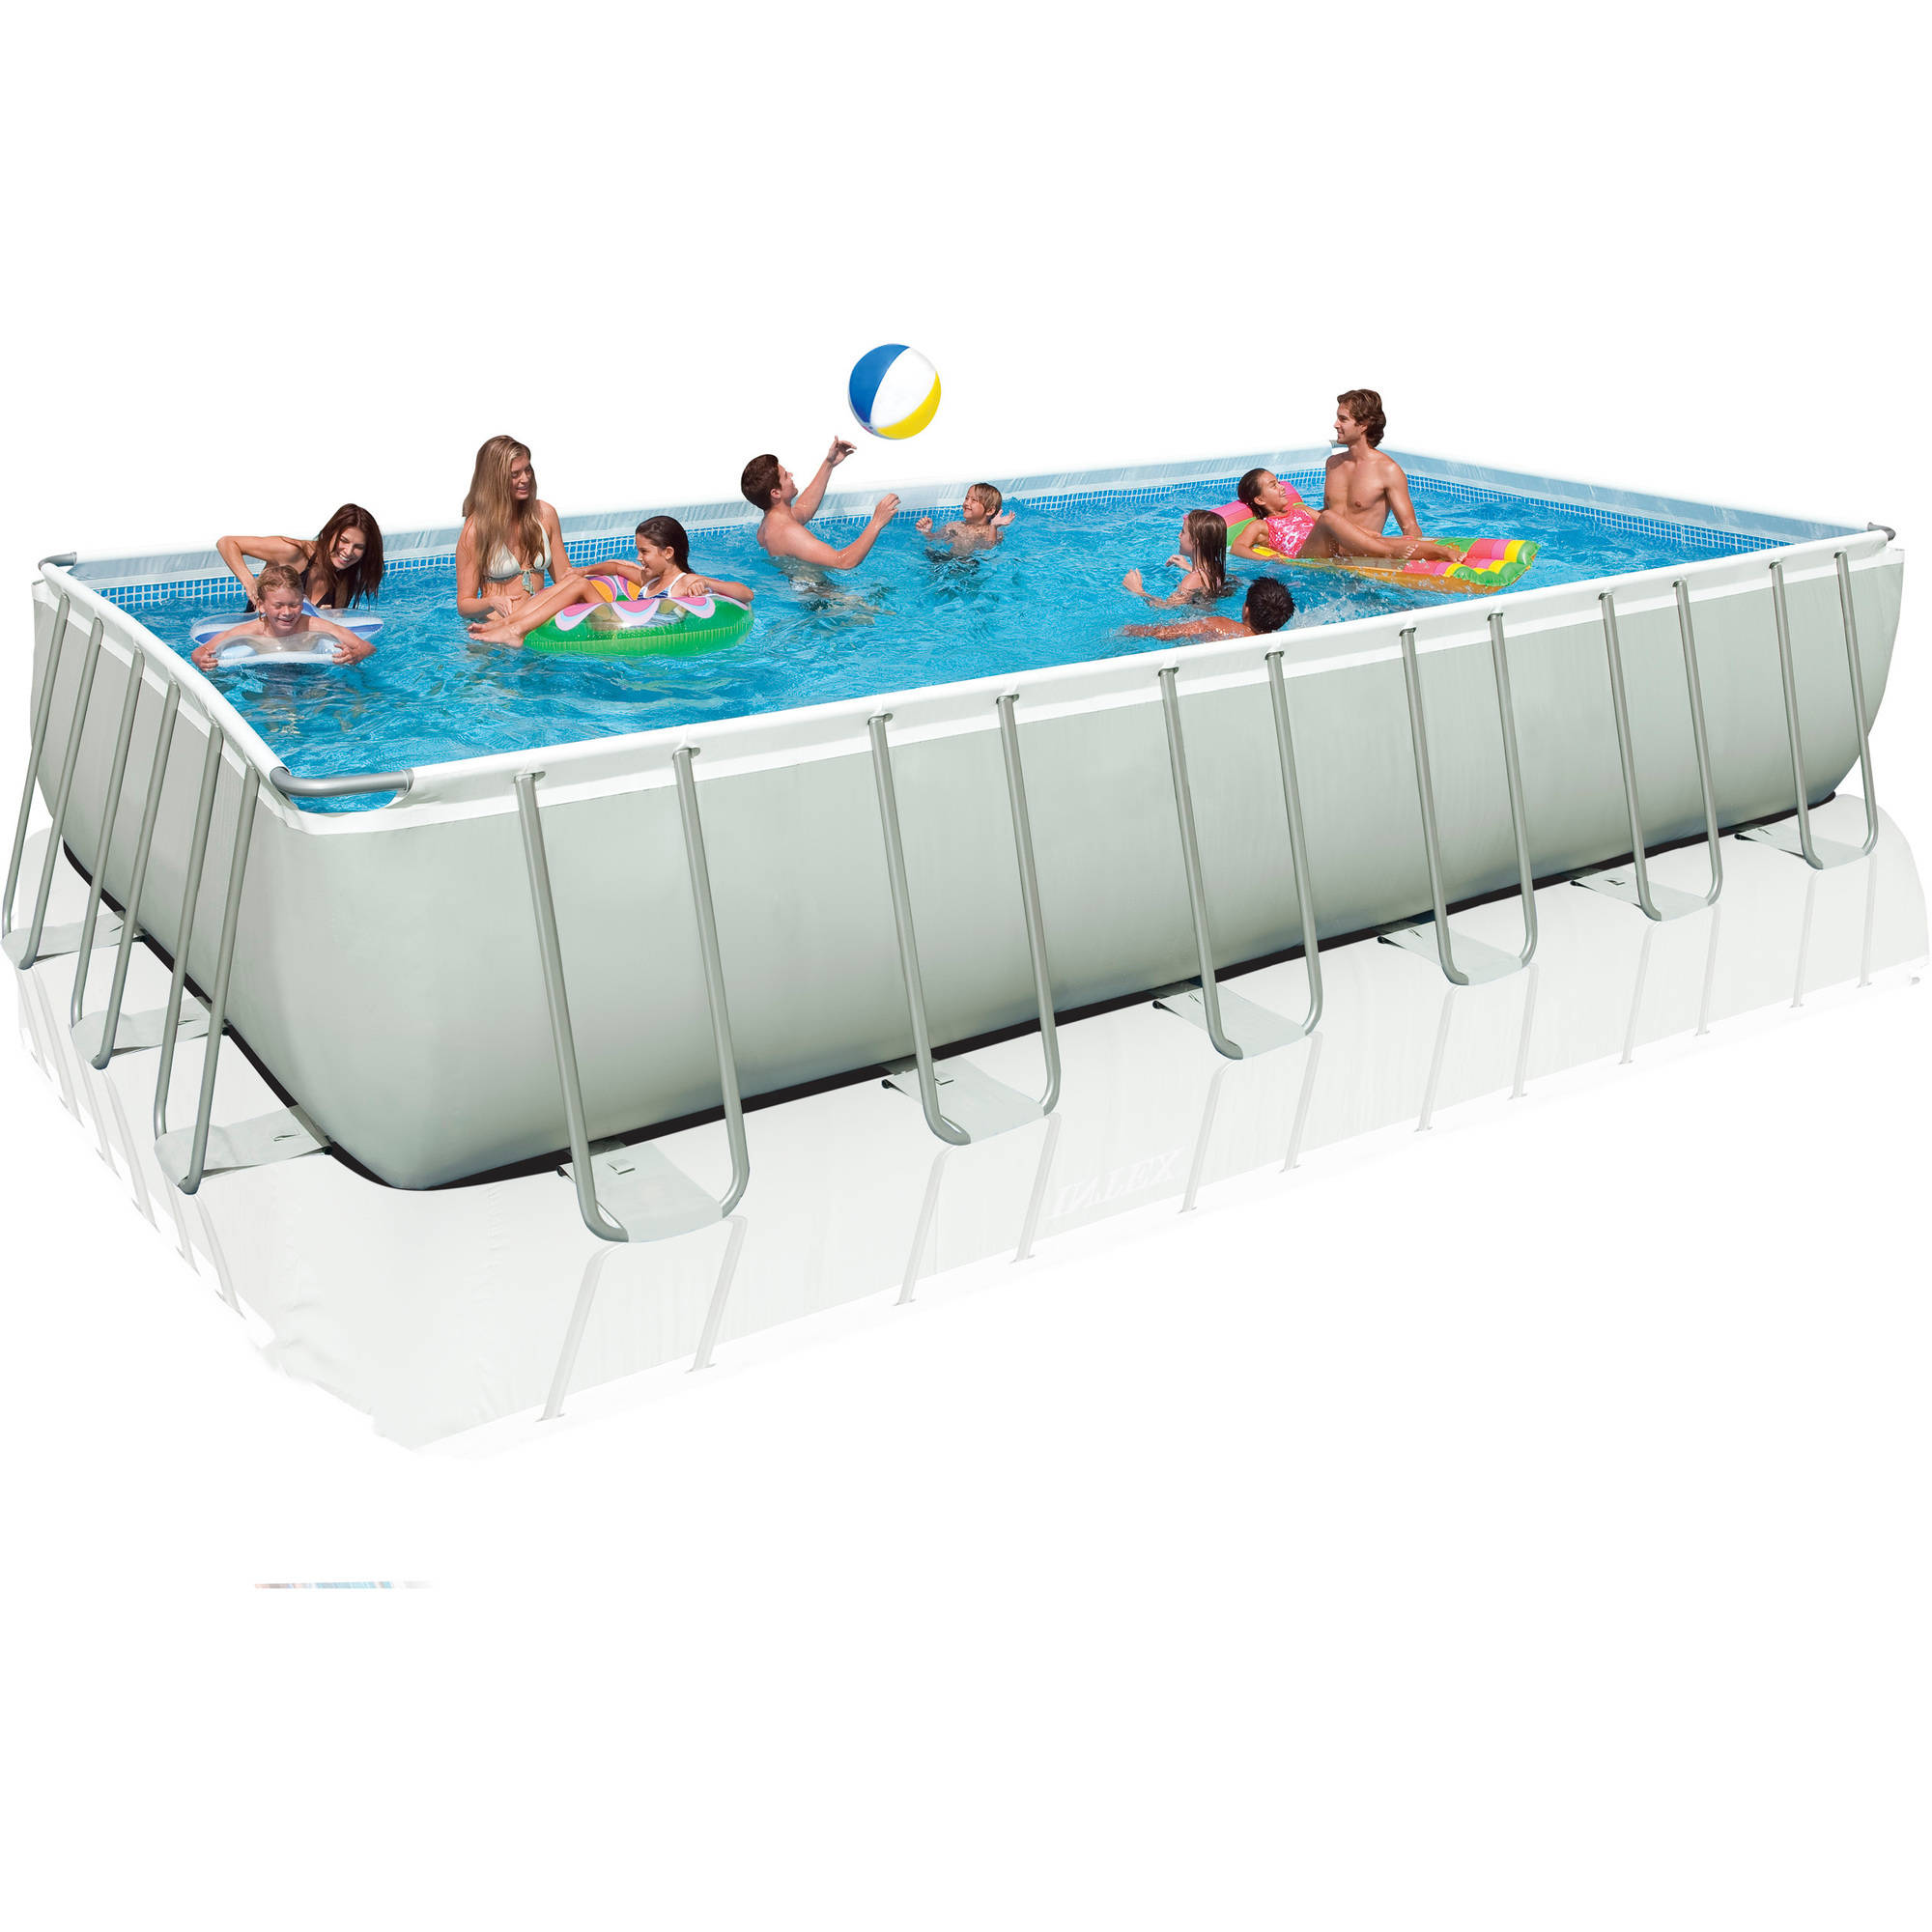 Intex 24' x 12' x 52" Ultra Frame Rectangular Above Ground Swimming Pool with Sand Filter Pump - image 2 of 6